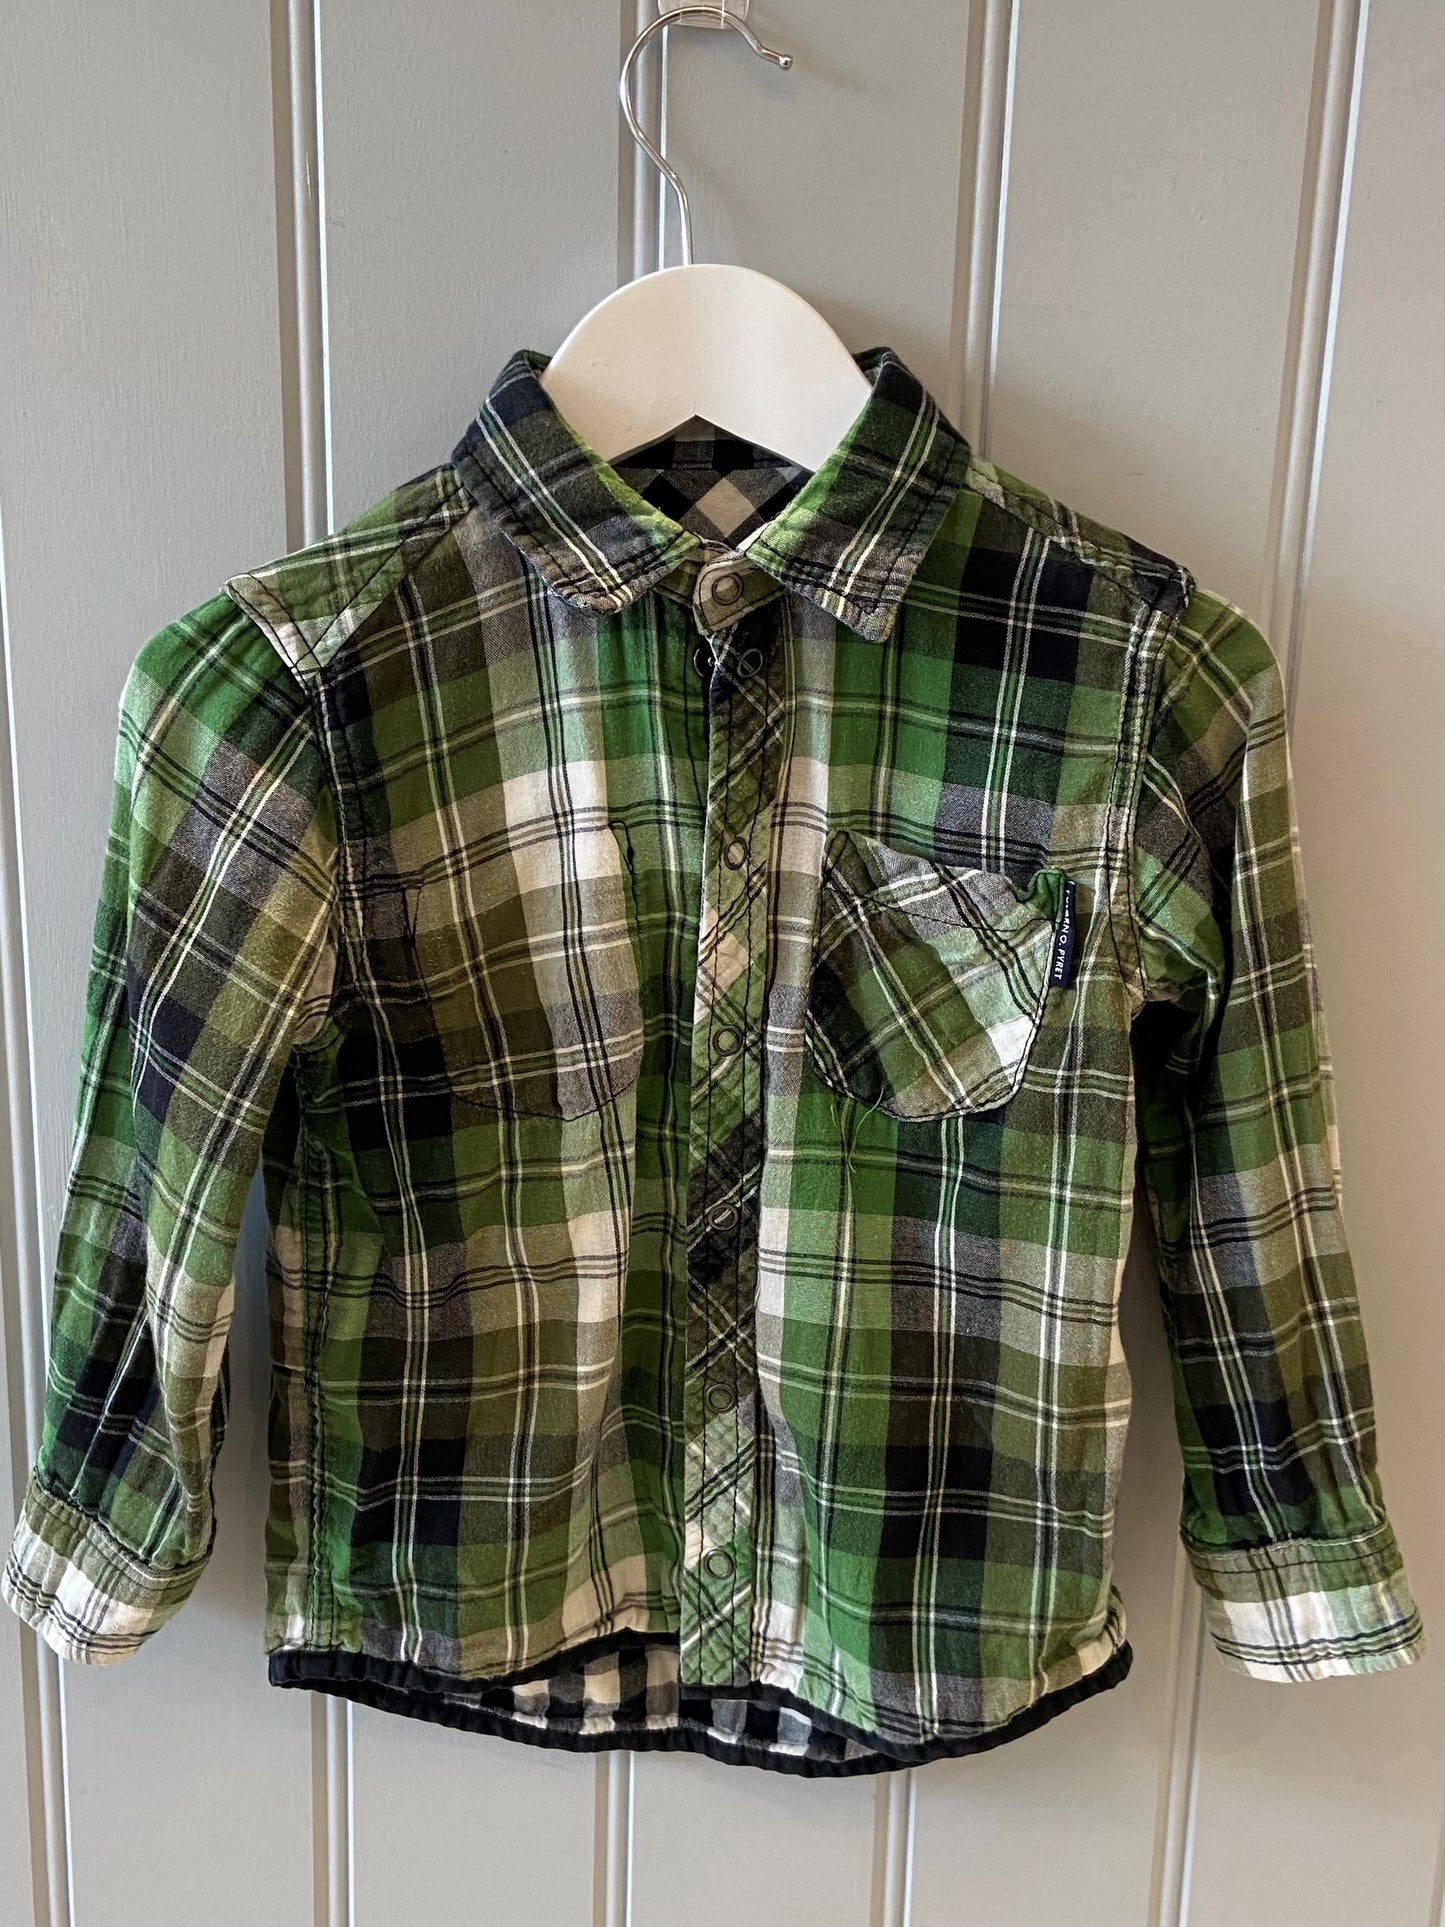 Pre-loved Reversible Checked Shirt by Polarn O.Pyret